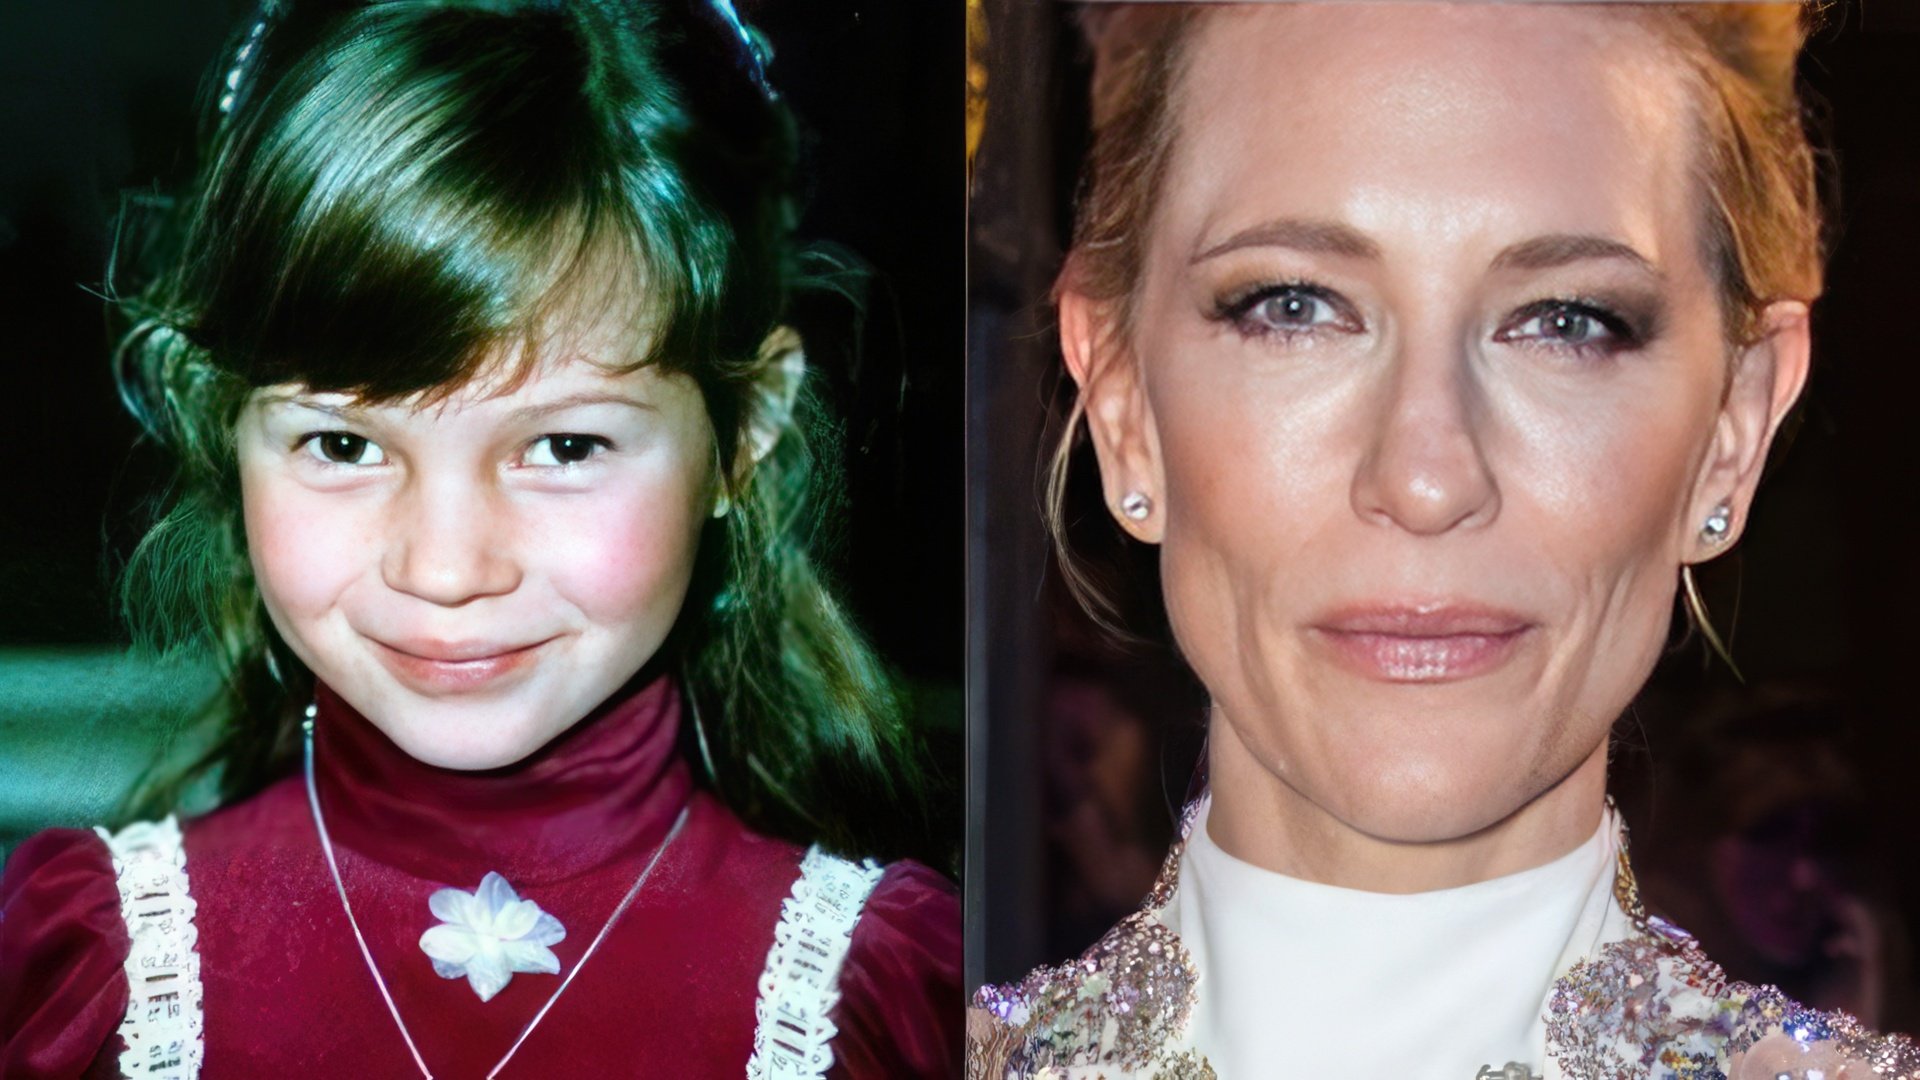 Cate Blanchett in her childhood and at present